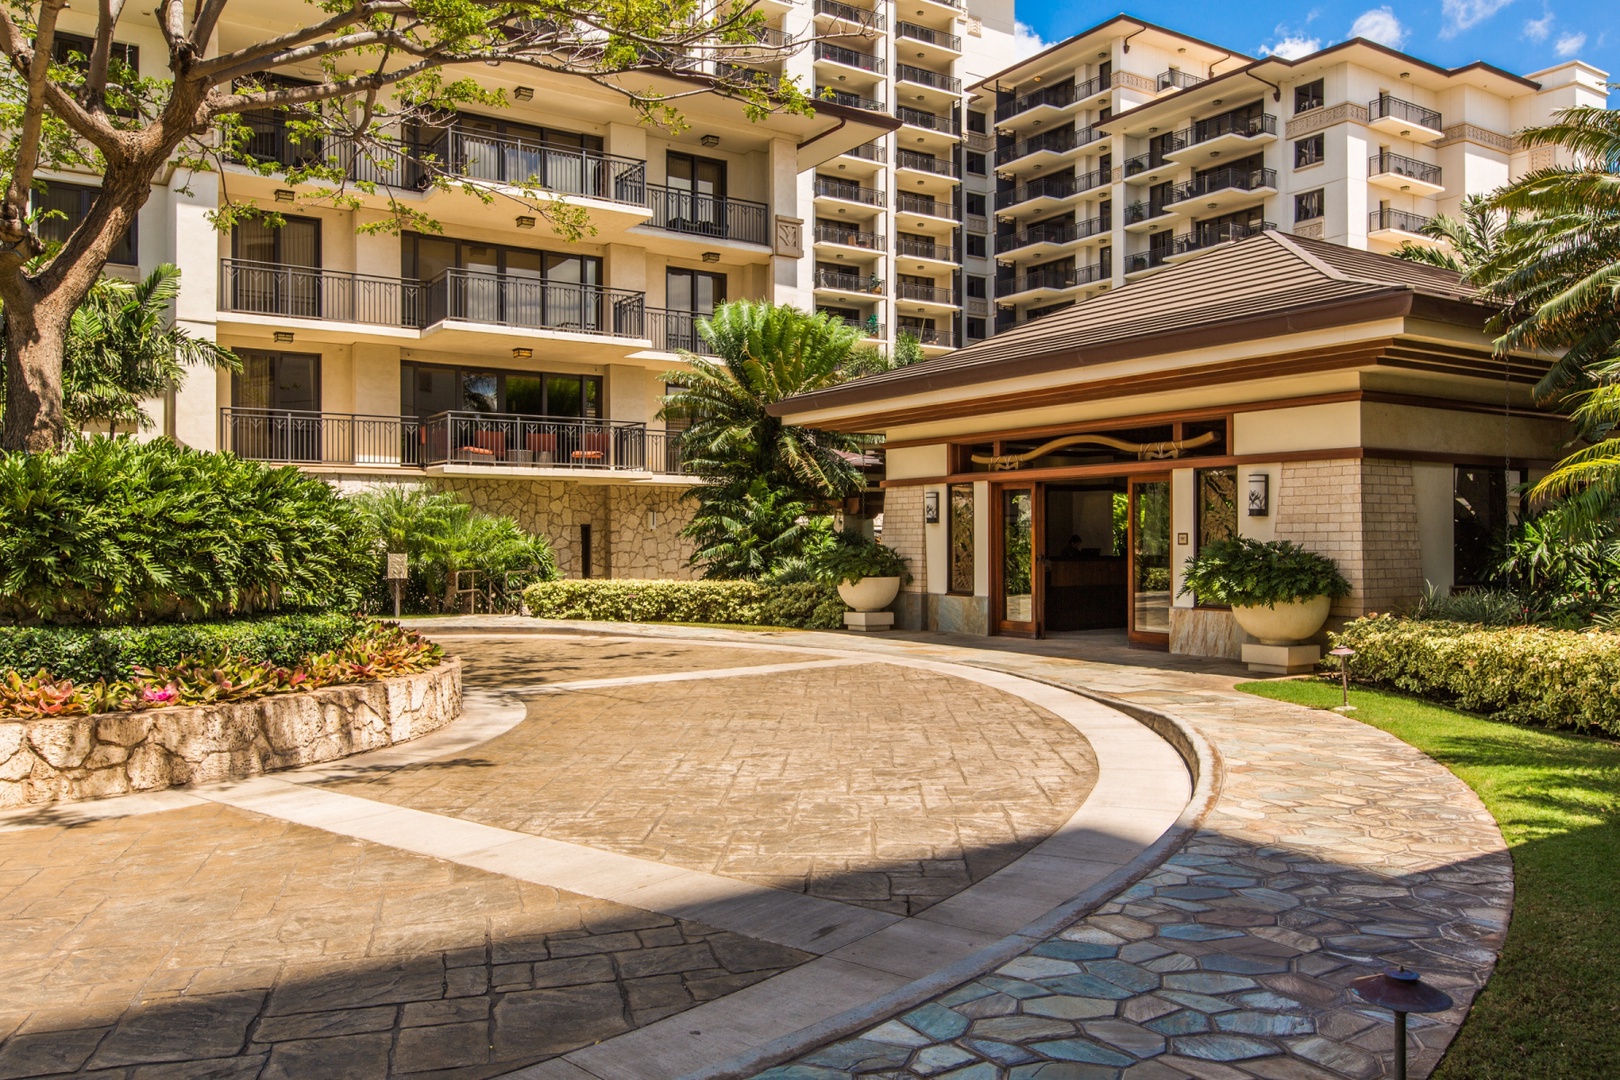 Kapolei Vacation Rentals, Ko Olina Beach Villa B604 - Ko Olina Resort guest entrace, where you are greeted for check in.